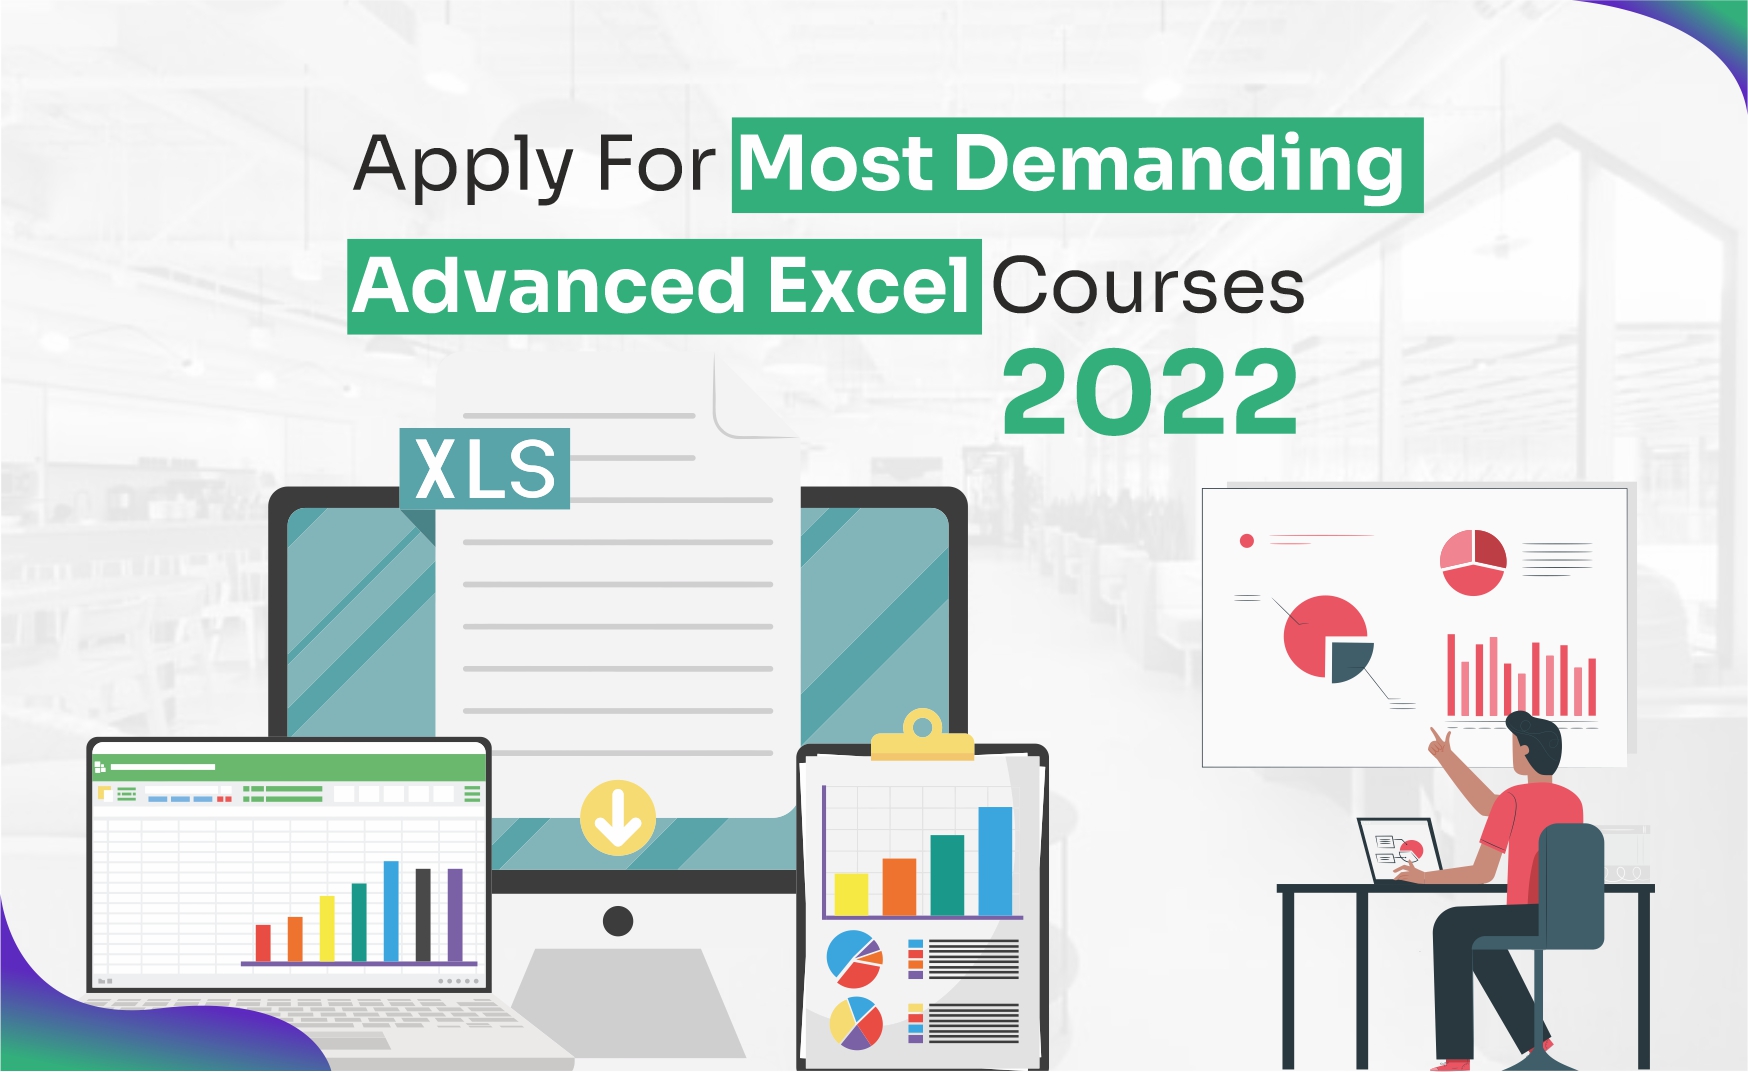 Apply For Most Demanding Advanced Excel Courses